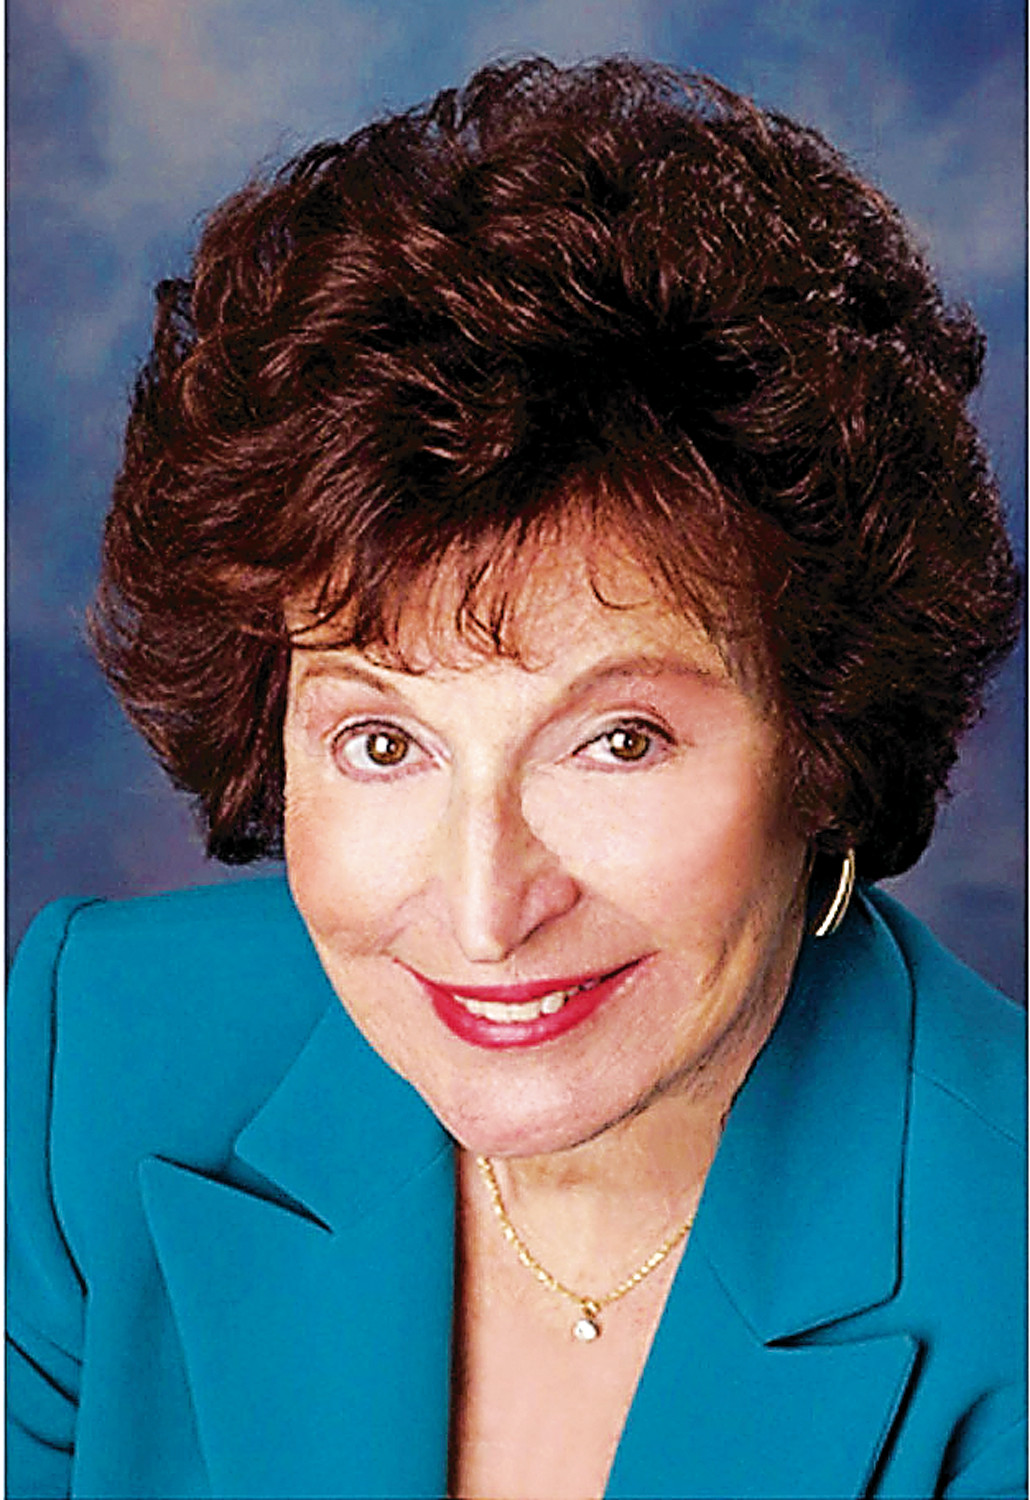 Norma Gonsalves
Republican, incumbent

Age: 81
Lives in: East Meadow
Career: Educator in New York City school system for 25 years.
Family: Husband, John; three children and four grandchildren.
Organizations: Project director for Crime Watch and Civilian Patrol in East Meadow; member of the East Meadow Chamber of Commerce, the Edward J. Speno Lodge #2568 Order Sons of Italy in America and the Kiwanis Club of East Meadow.